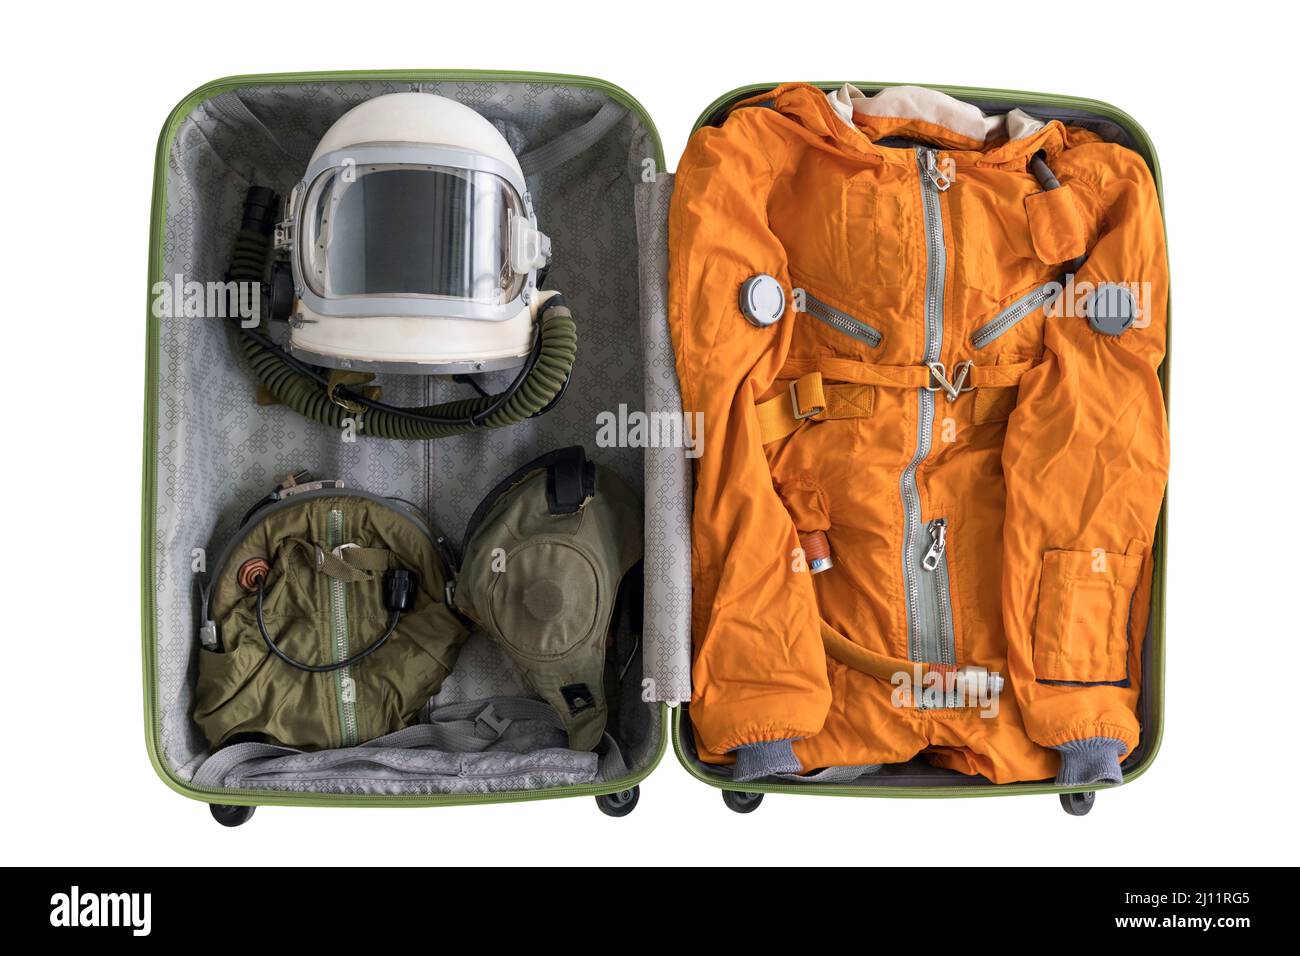 Open suitcase packed for space travelling with astronaut orange space suit, space helmet and spacesuit accessories isolated on white background Stock Photo